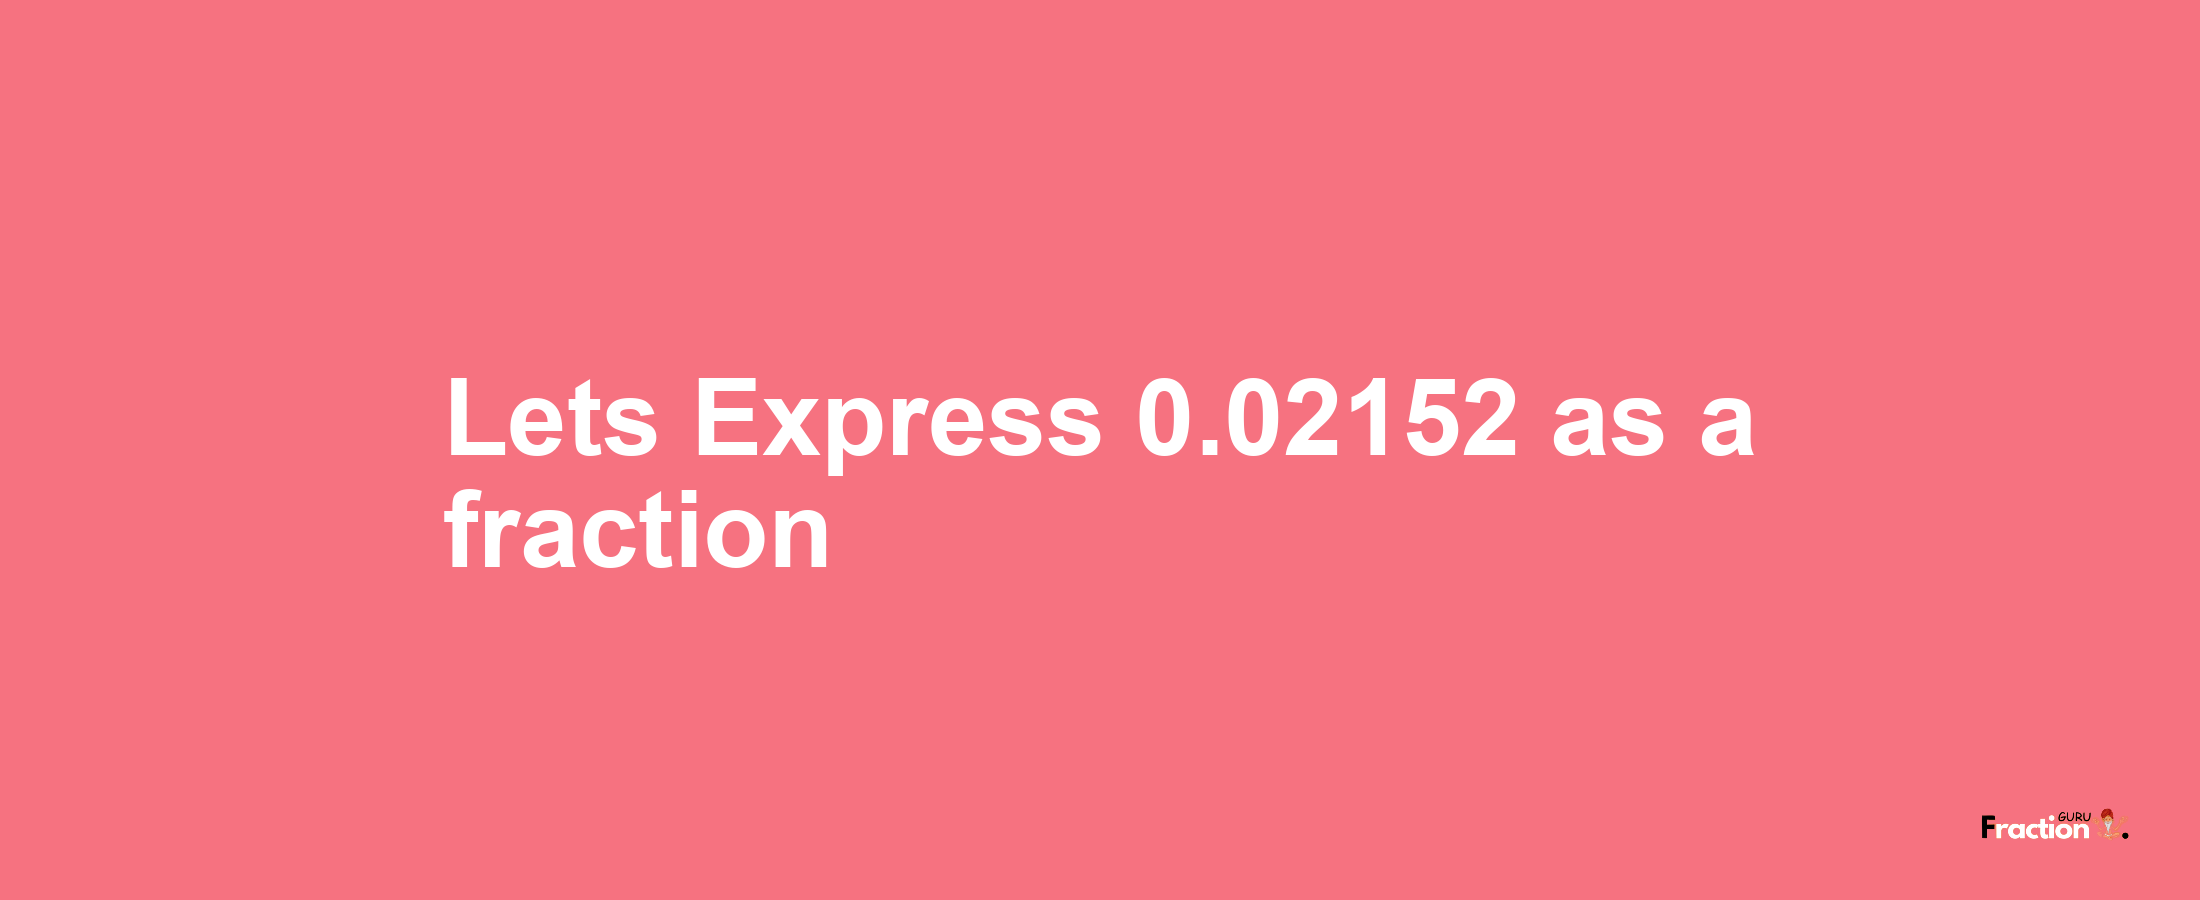 Lets Express 0.02152 as afraction